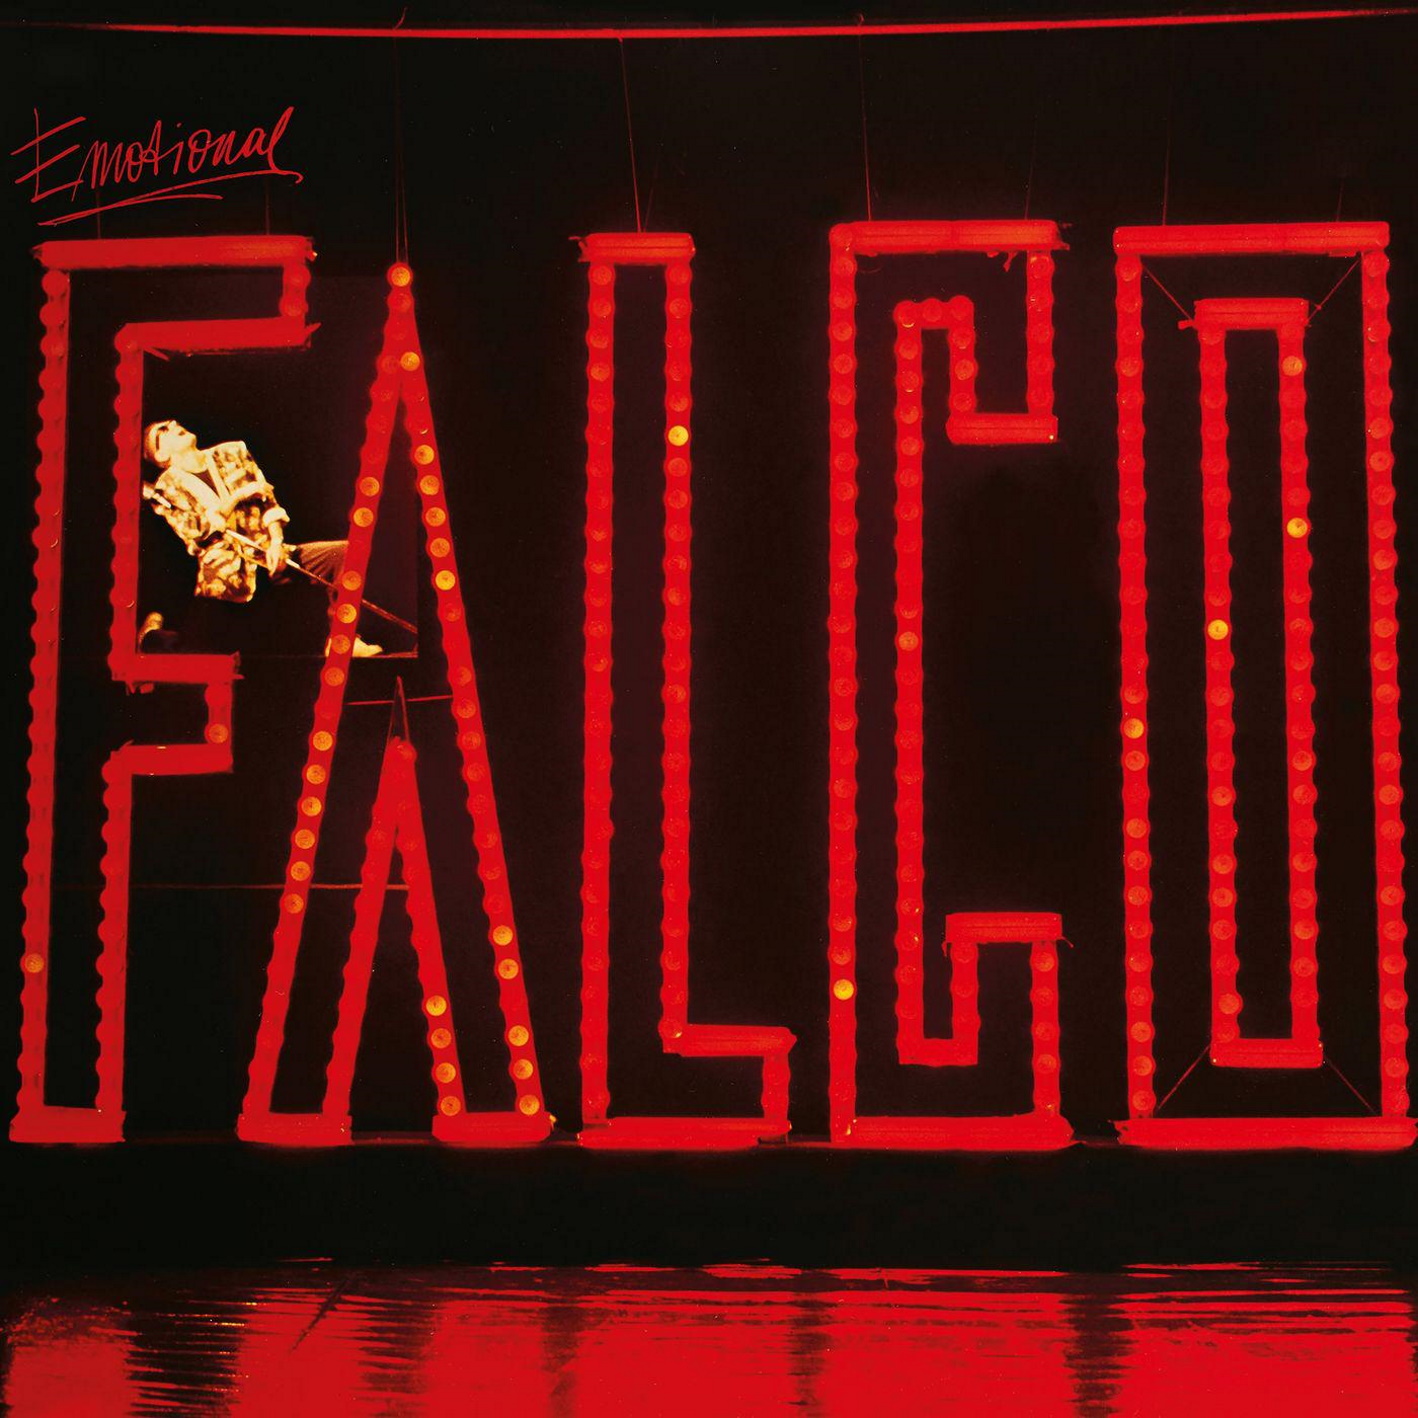 Falco - Emotional (Deluxe Version)